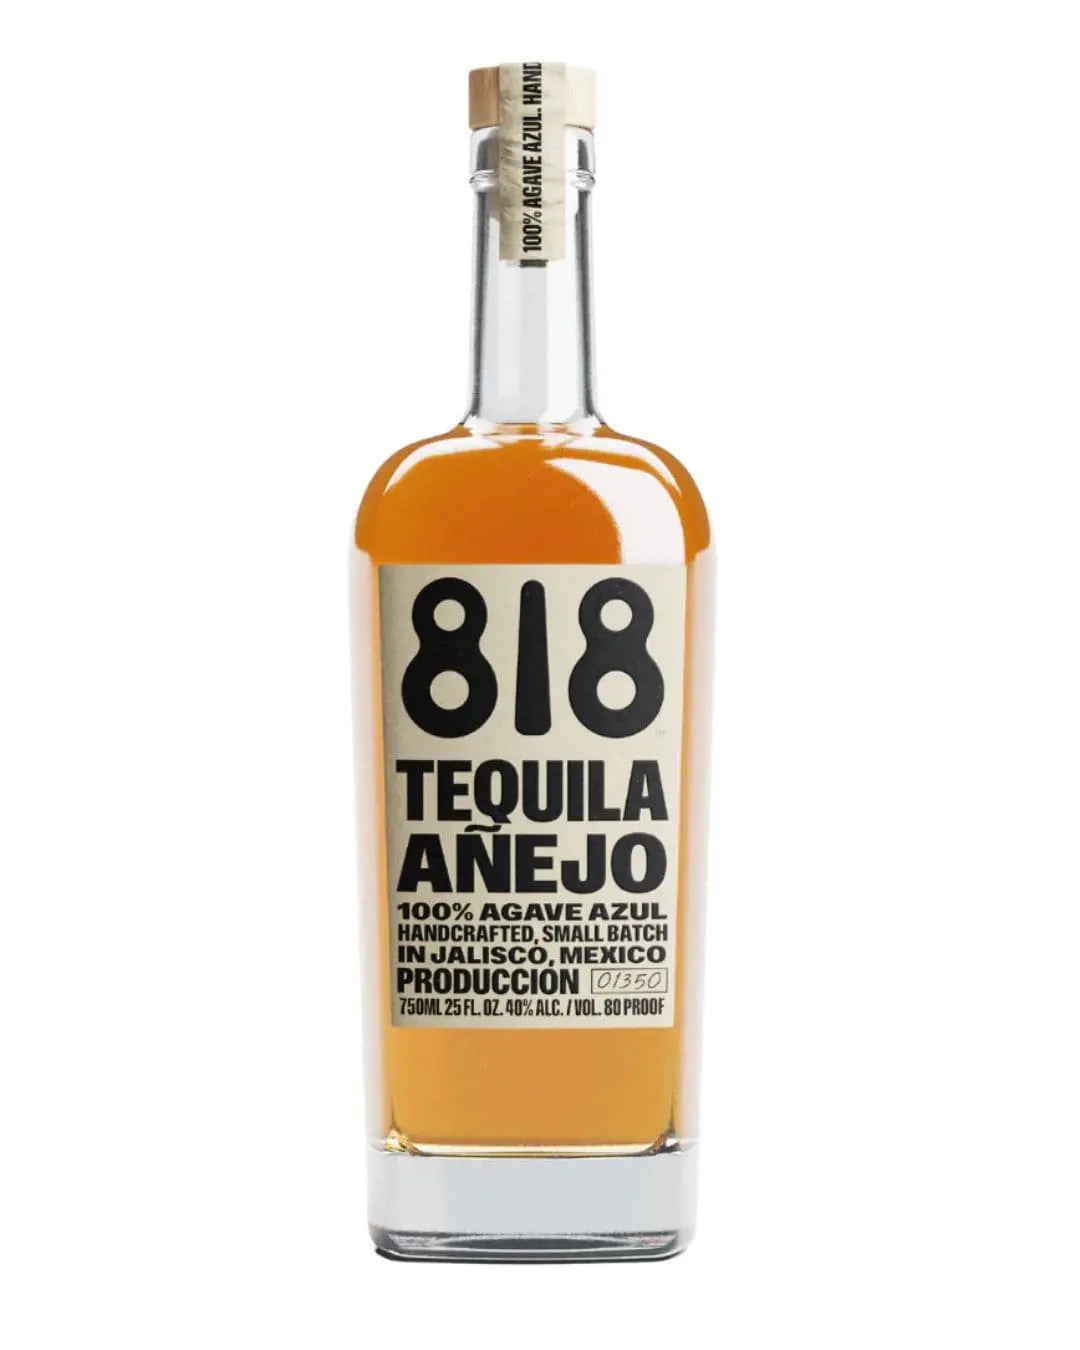 818 Tequila Anejo | Kendall Jenner, 75 cl Tequila & Mezcal